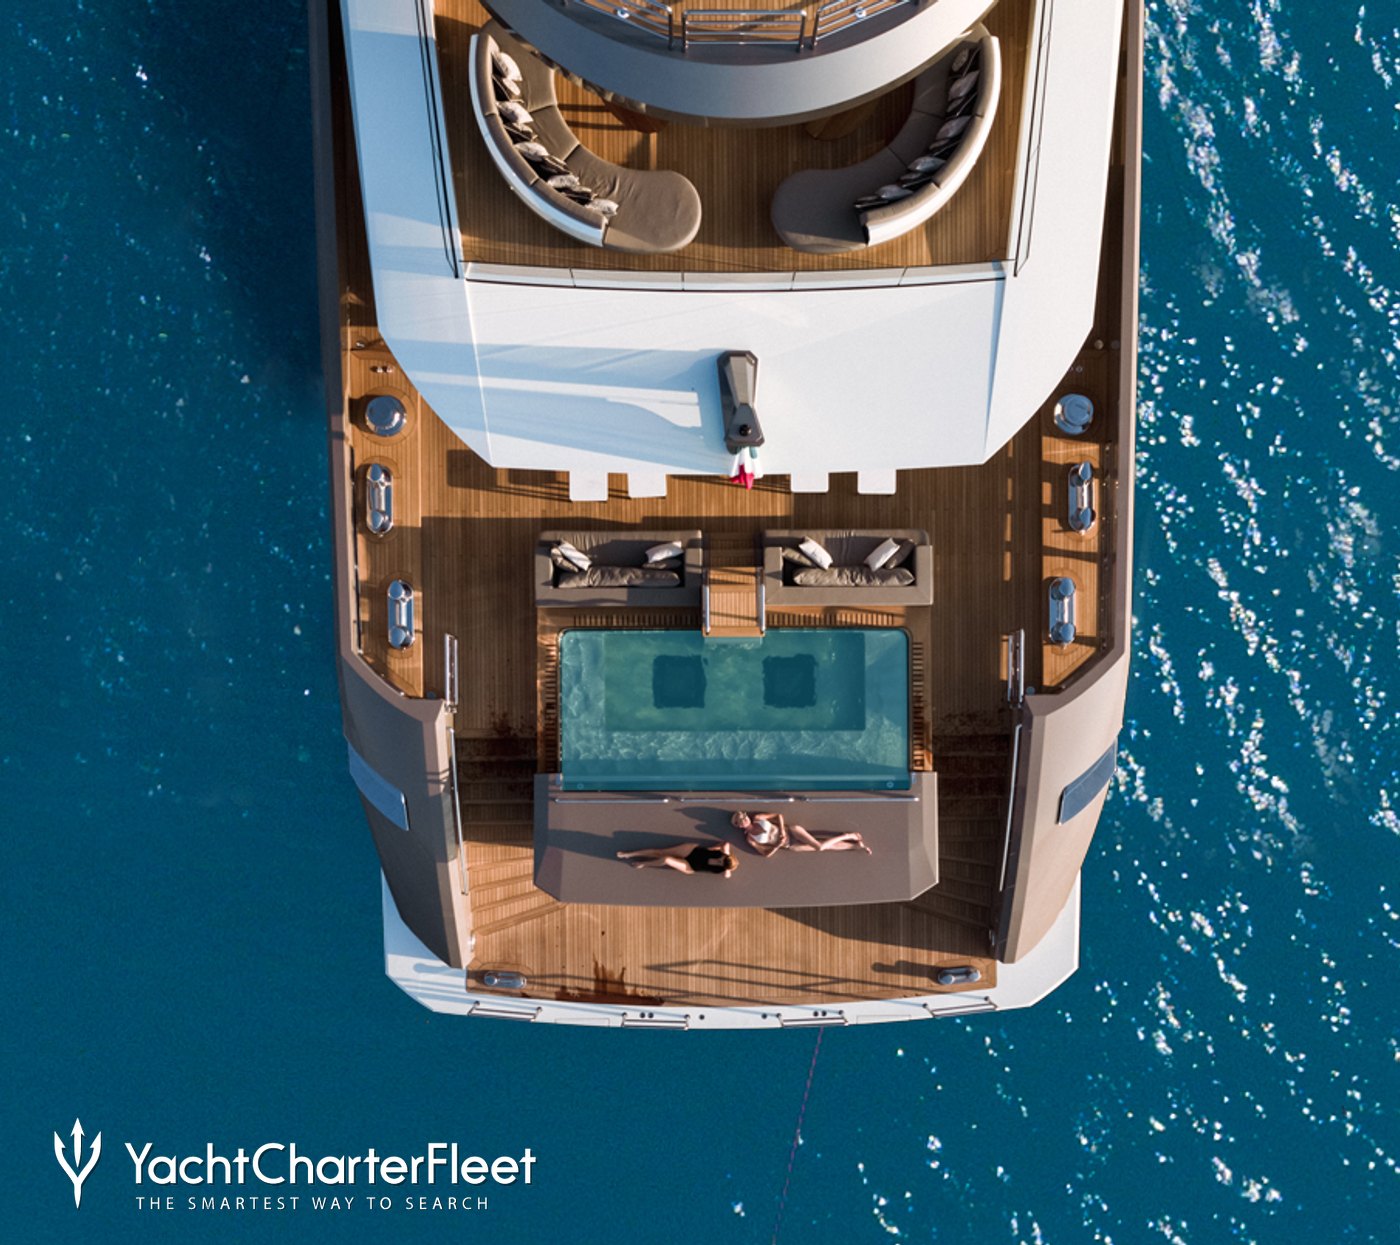 SOLO YACHT REVIEW: 72m superyacht for charter | YachtCharterFleet